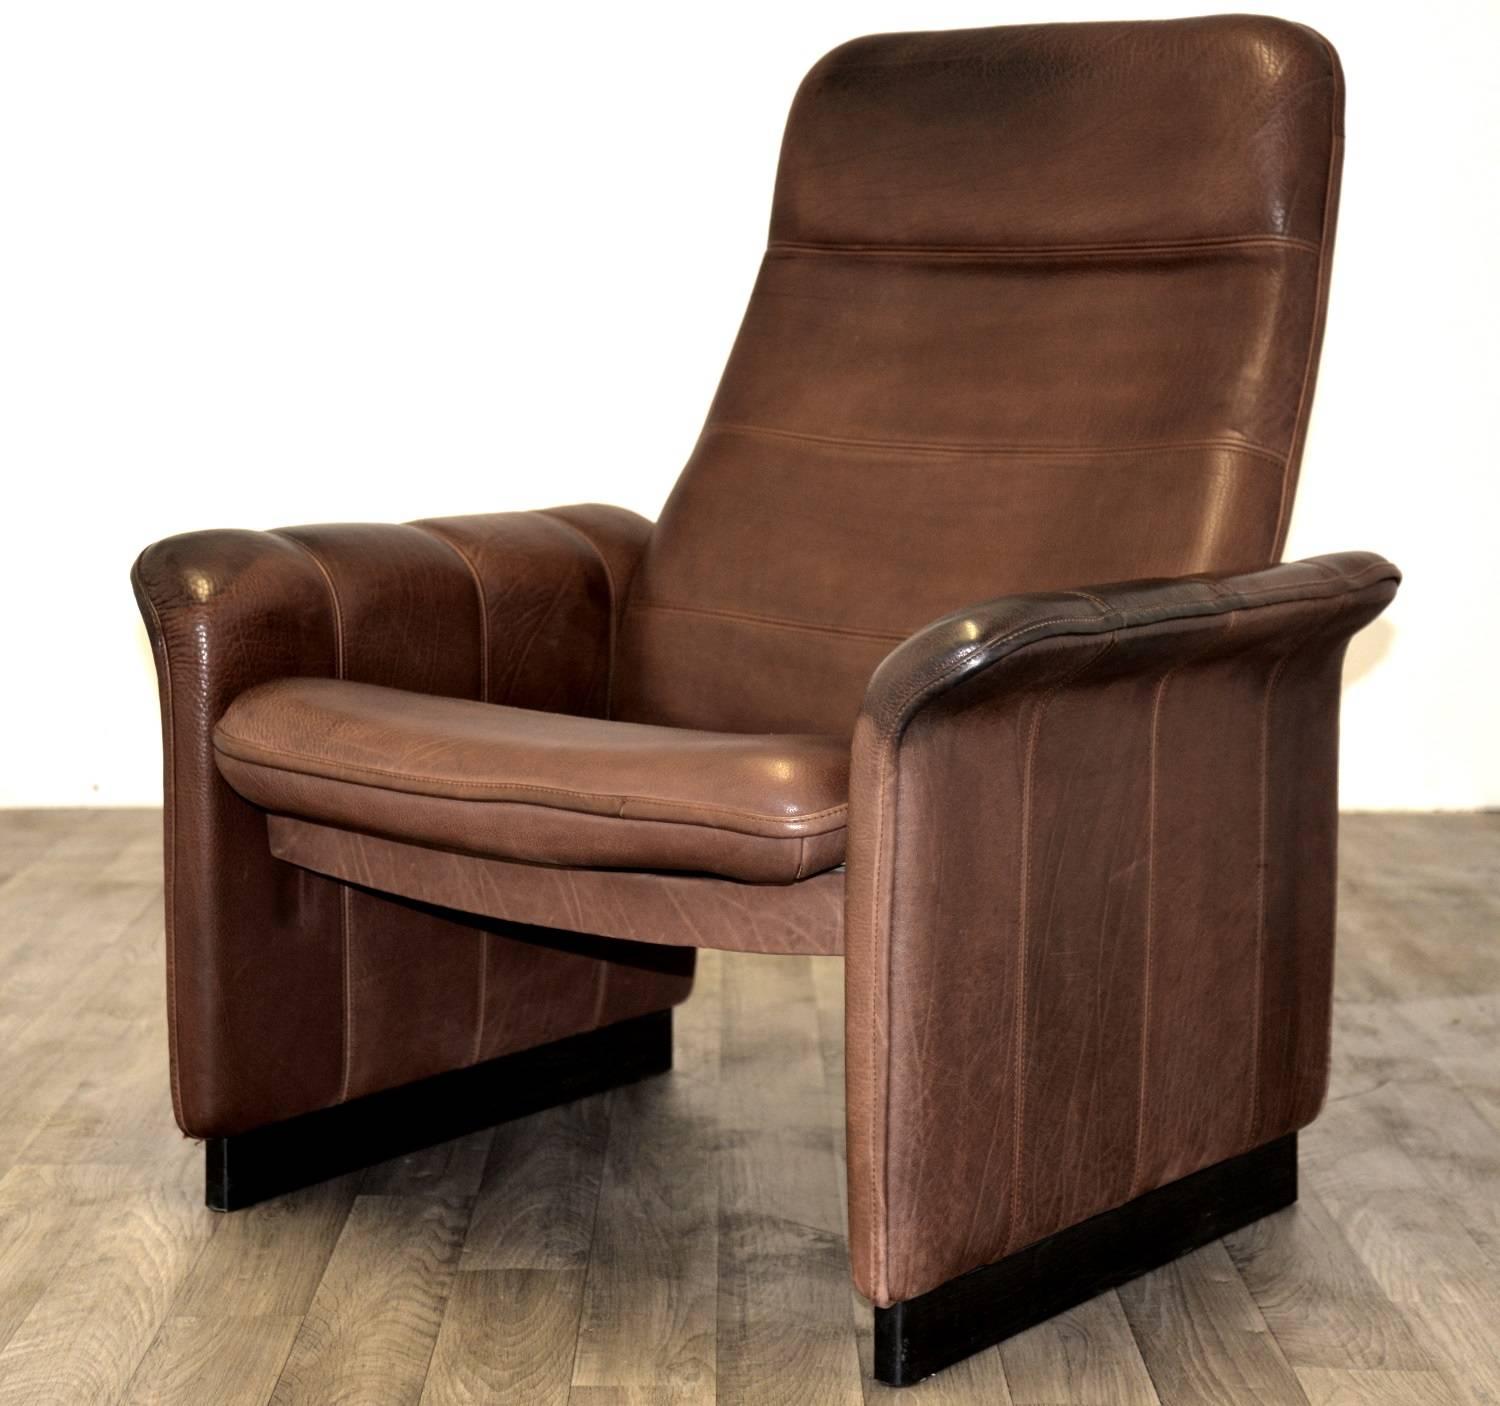 Discounted airfreight for our US and International customers ( from 2 weeks door to door) 

We bring to you a vintage de Sede DS lounge armchair and ottoman. Built to incredibly high standards by De Sede craftsman in Switzerland, this armchair is